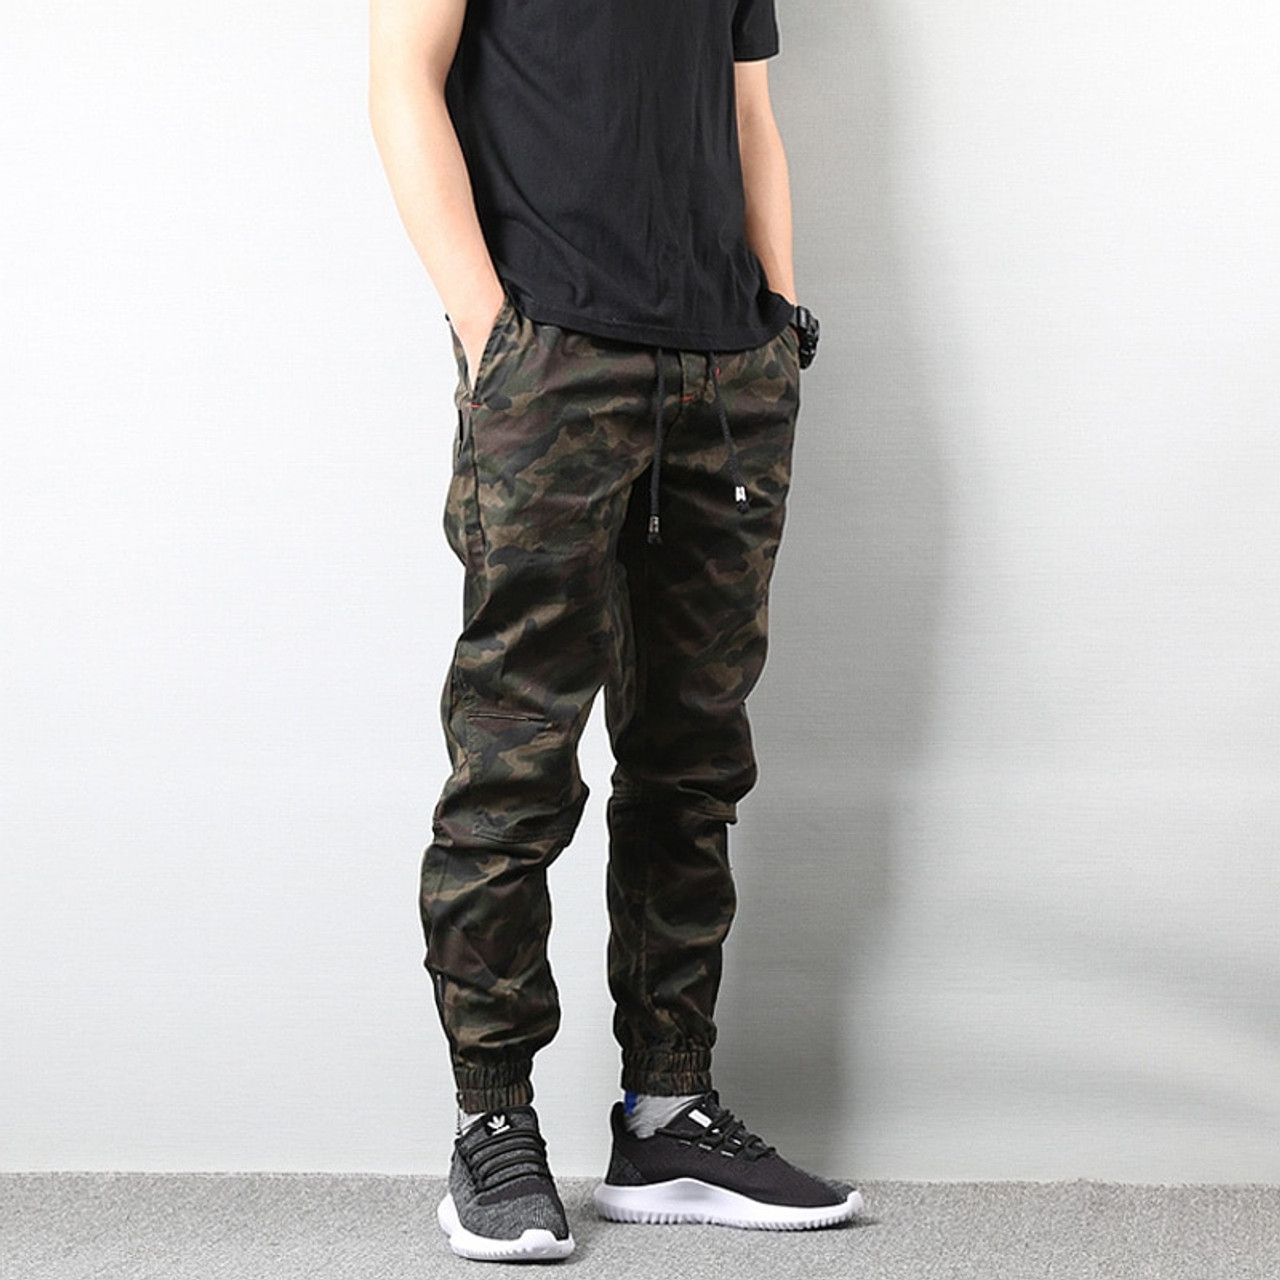 army type jeans